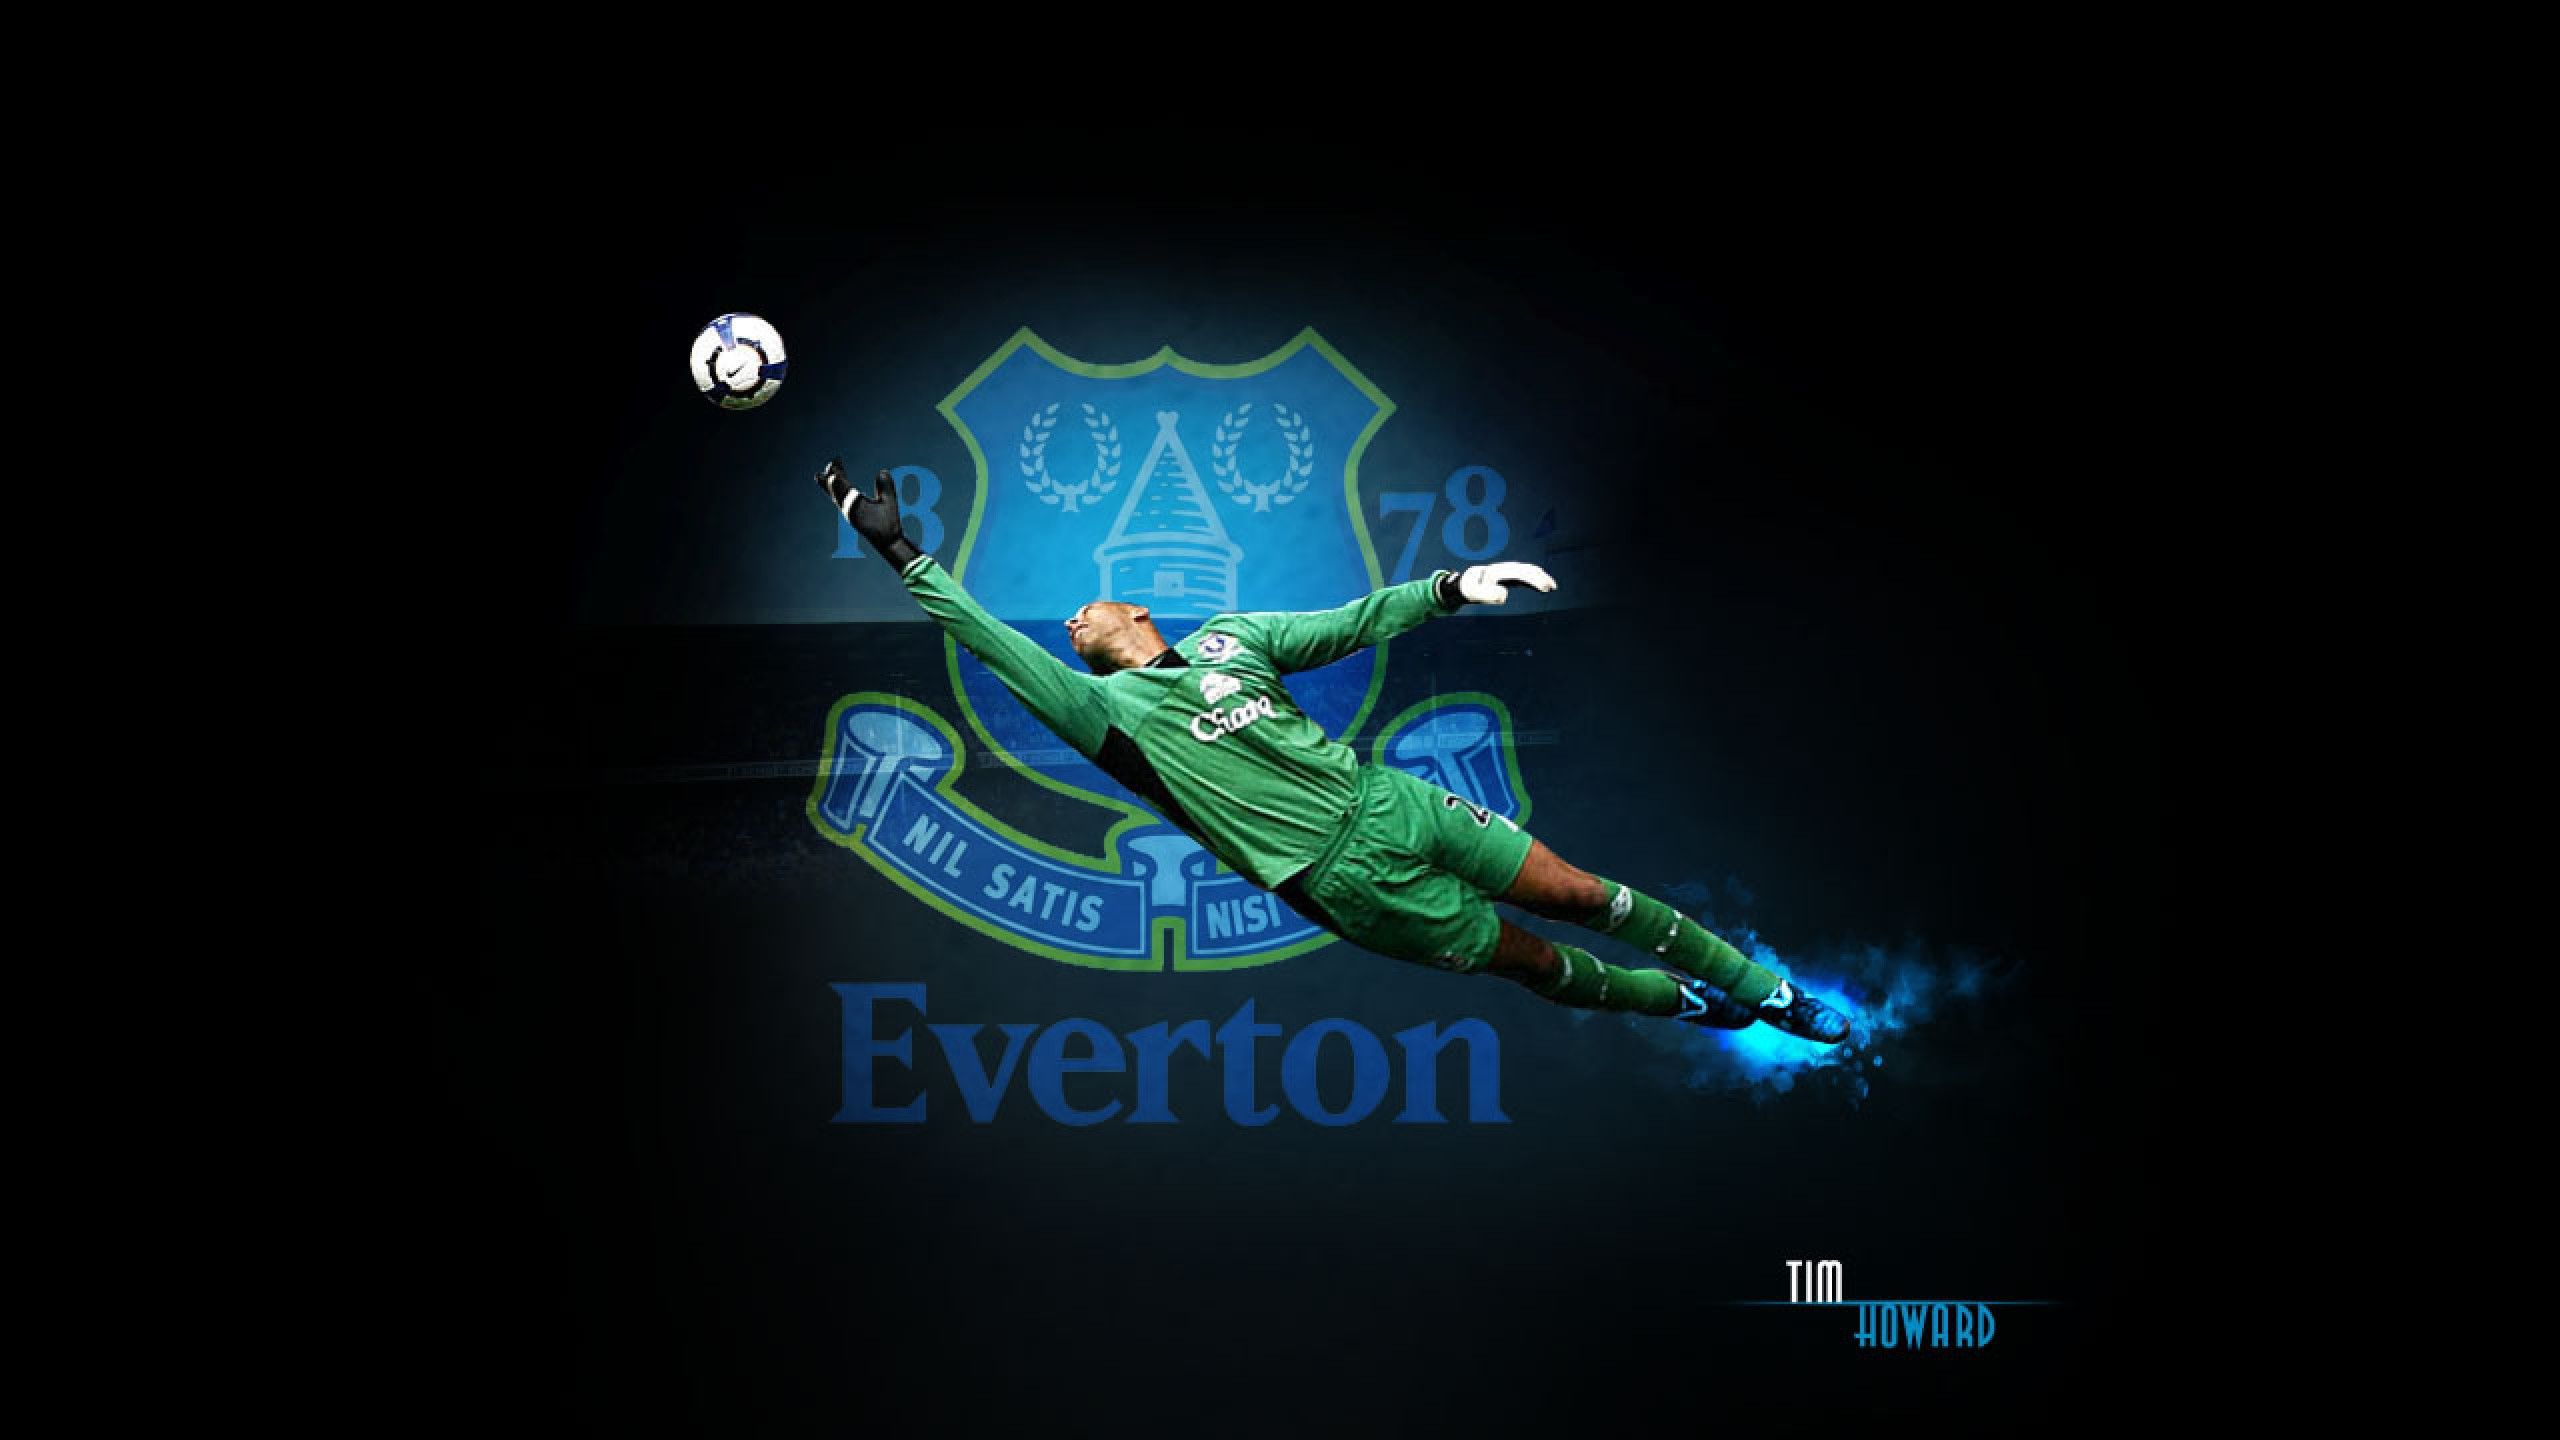 Best FC everton wallpapers and images - wallpapers, pictures, photos